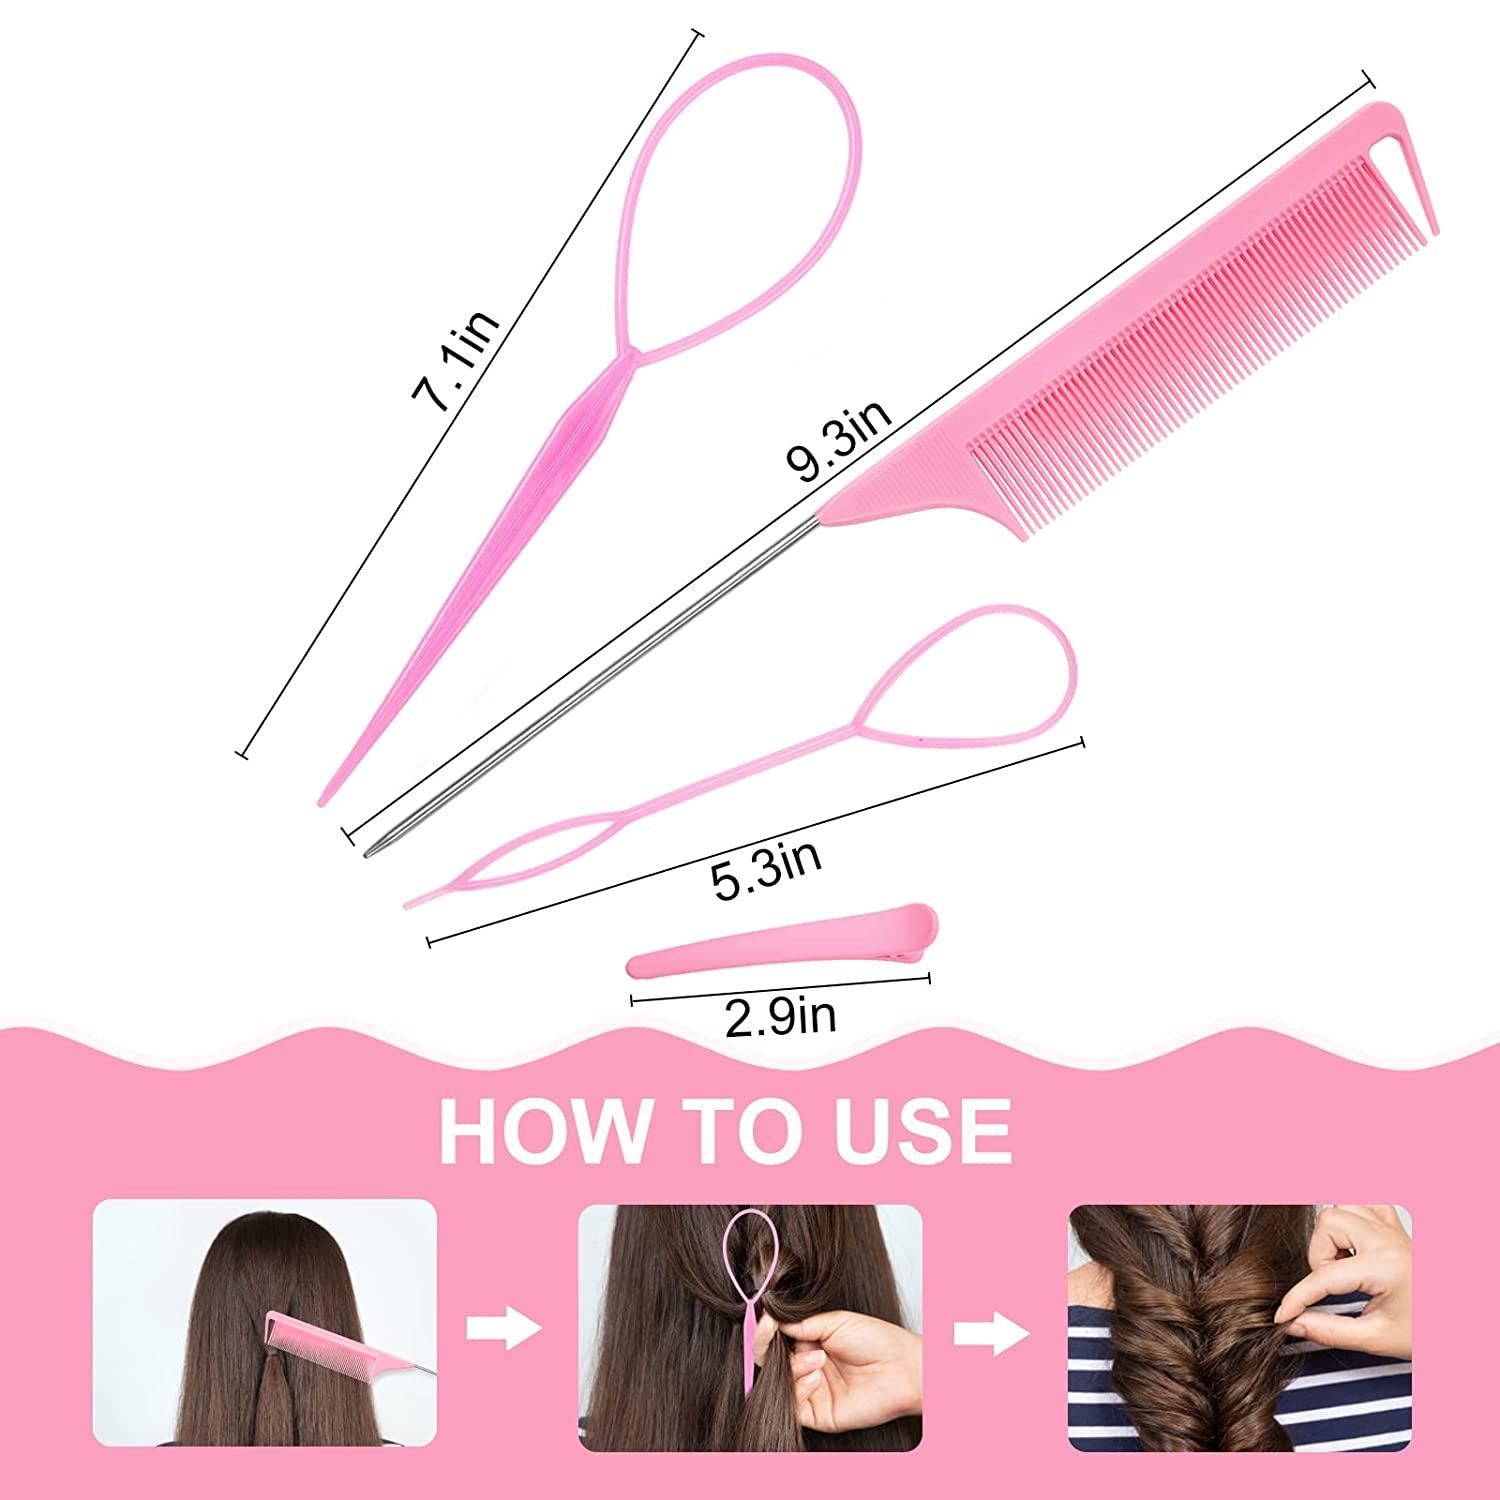 4 Pack Hair Loop Tool Set with 2 pcs French Braid Tool Loop,1 pcs rat tail  comb,1 hair clip, Hair Tail Tools for Hair Styling,Hair Braid Accessories  Ponytail Maker Pink,4 Pack